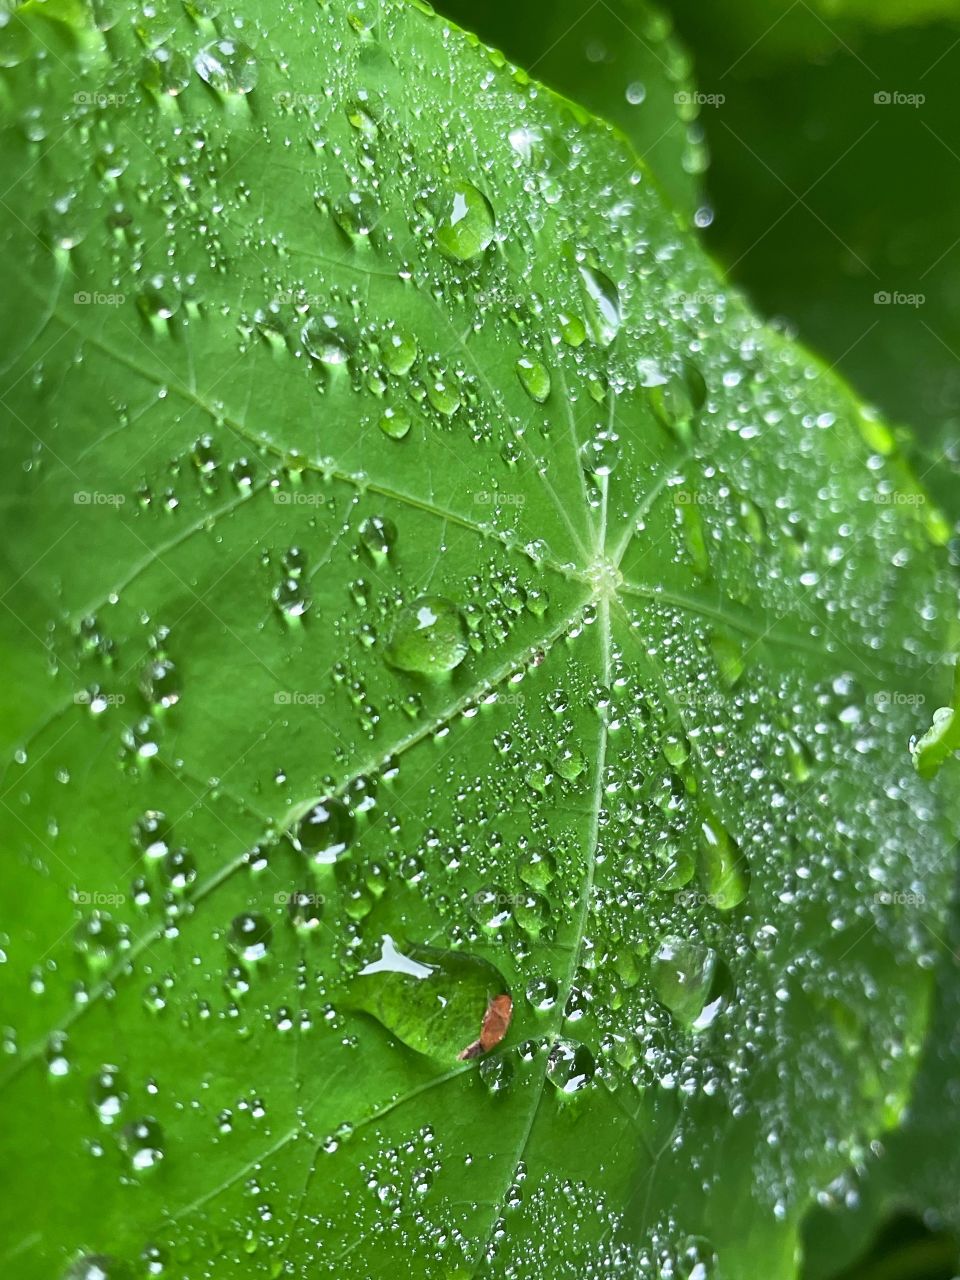 Water droplets bubbles splashes raindrops waterdrops plant green leaves leafs greenery botany phone photography rain shower rainy dew dewdrops wet outdoors nature storm 